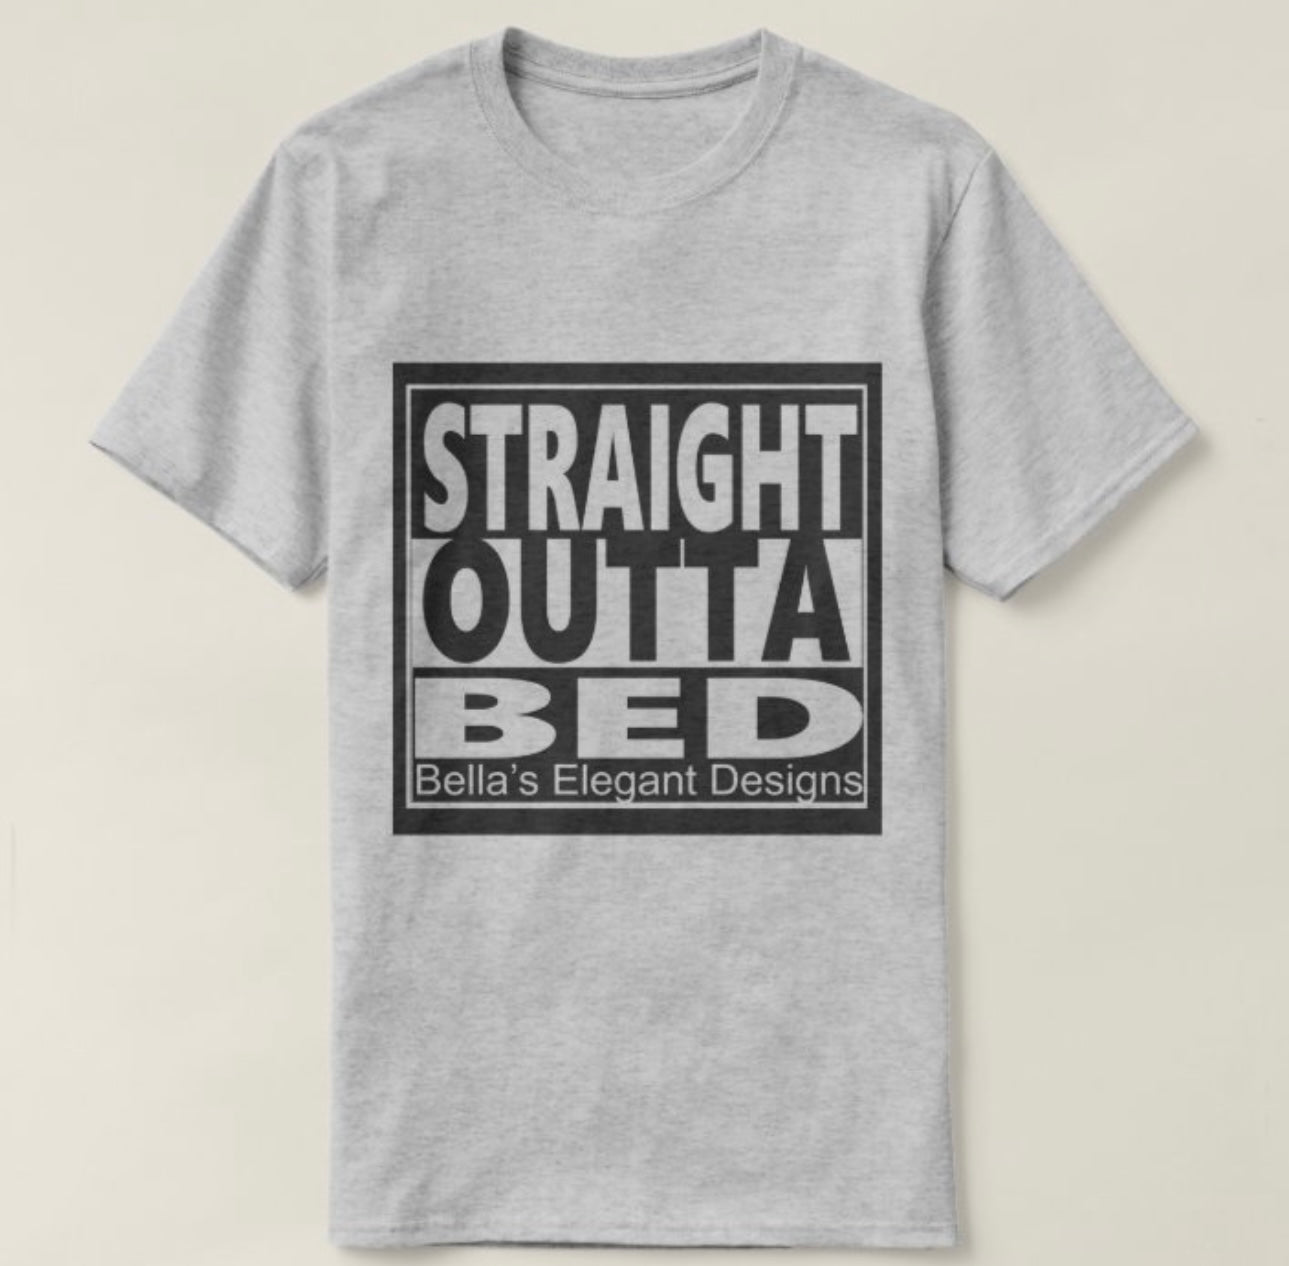 STRAIGHT OUTTA BED T-SHIRT